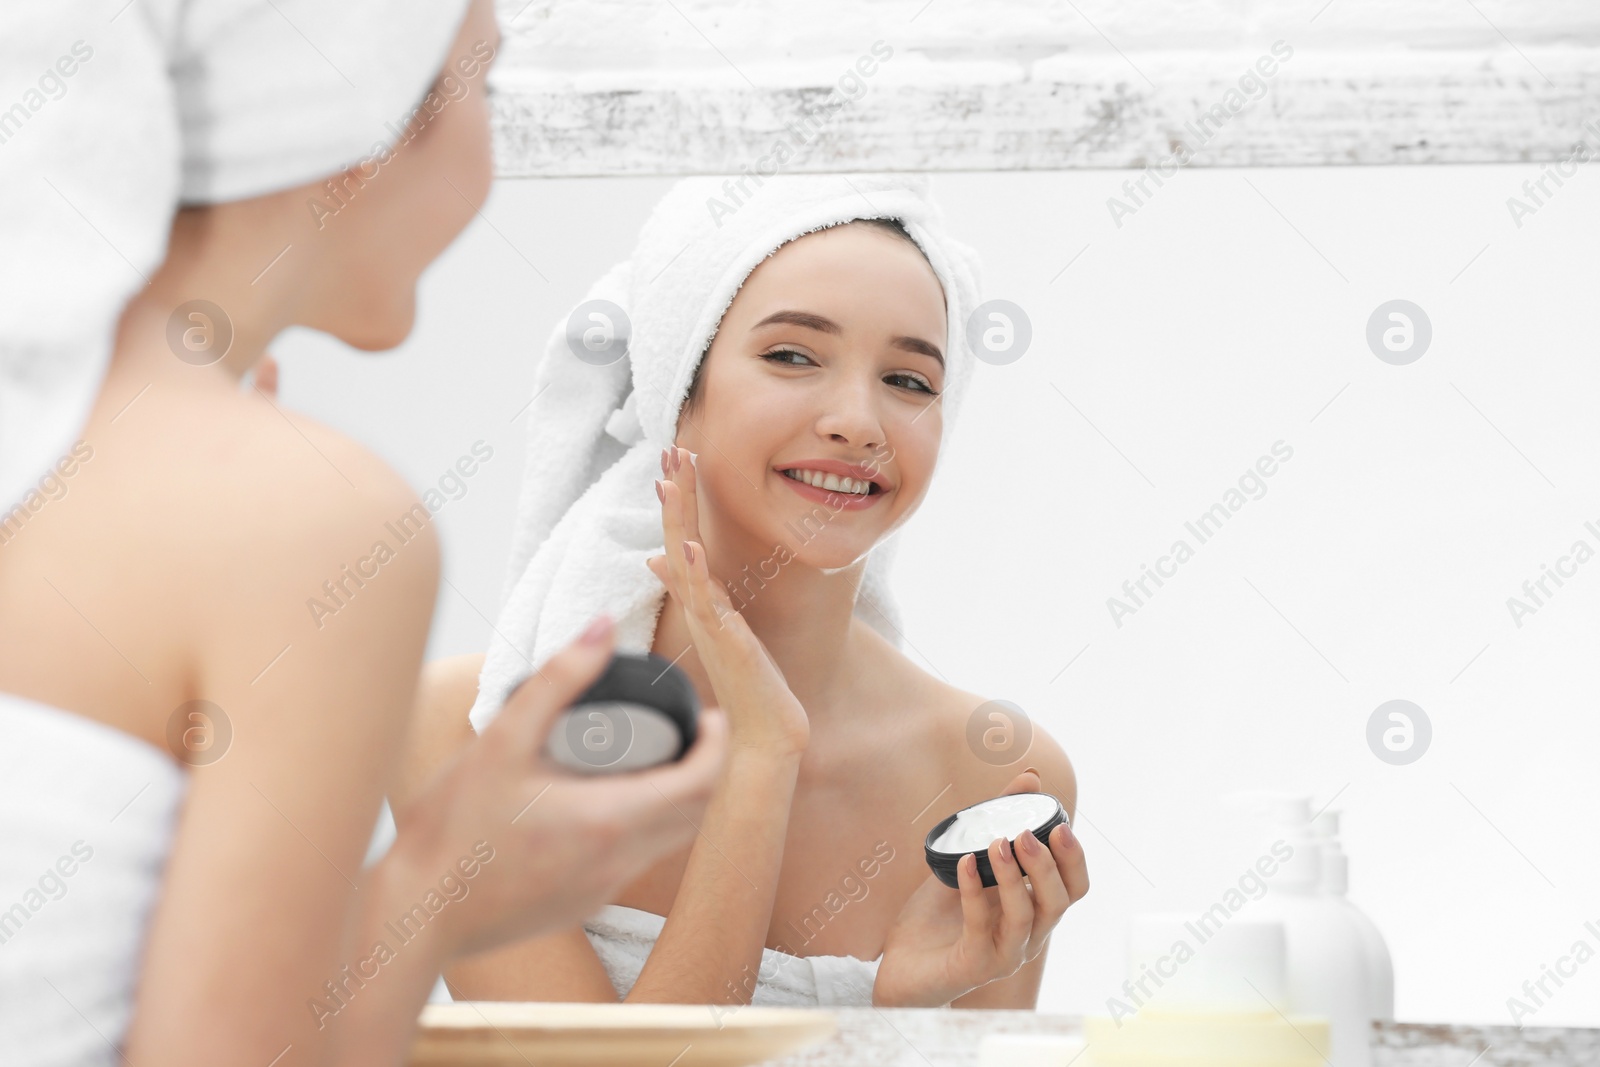 Photo of Teenage girl with acne problem using cream while looking in mirror indoors